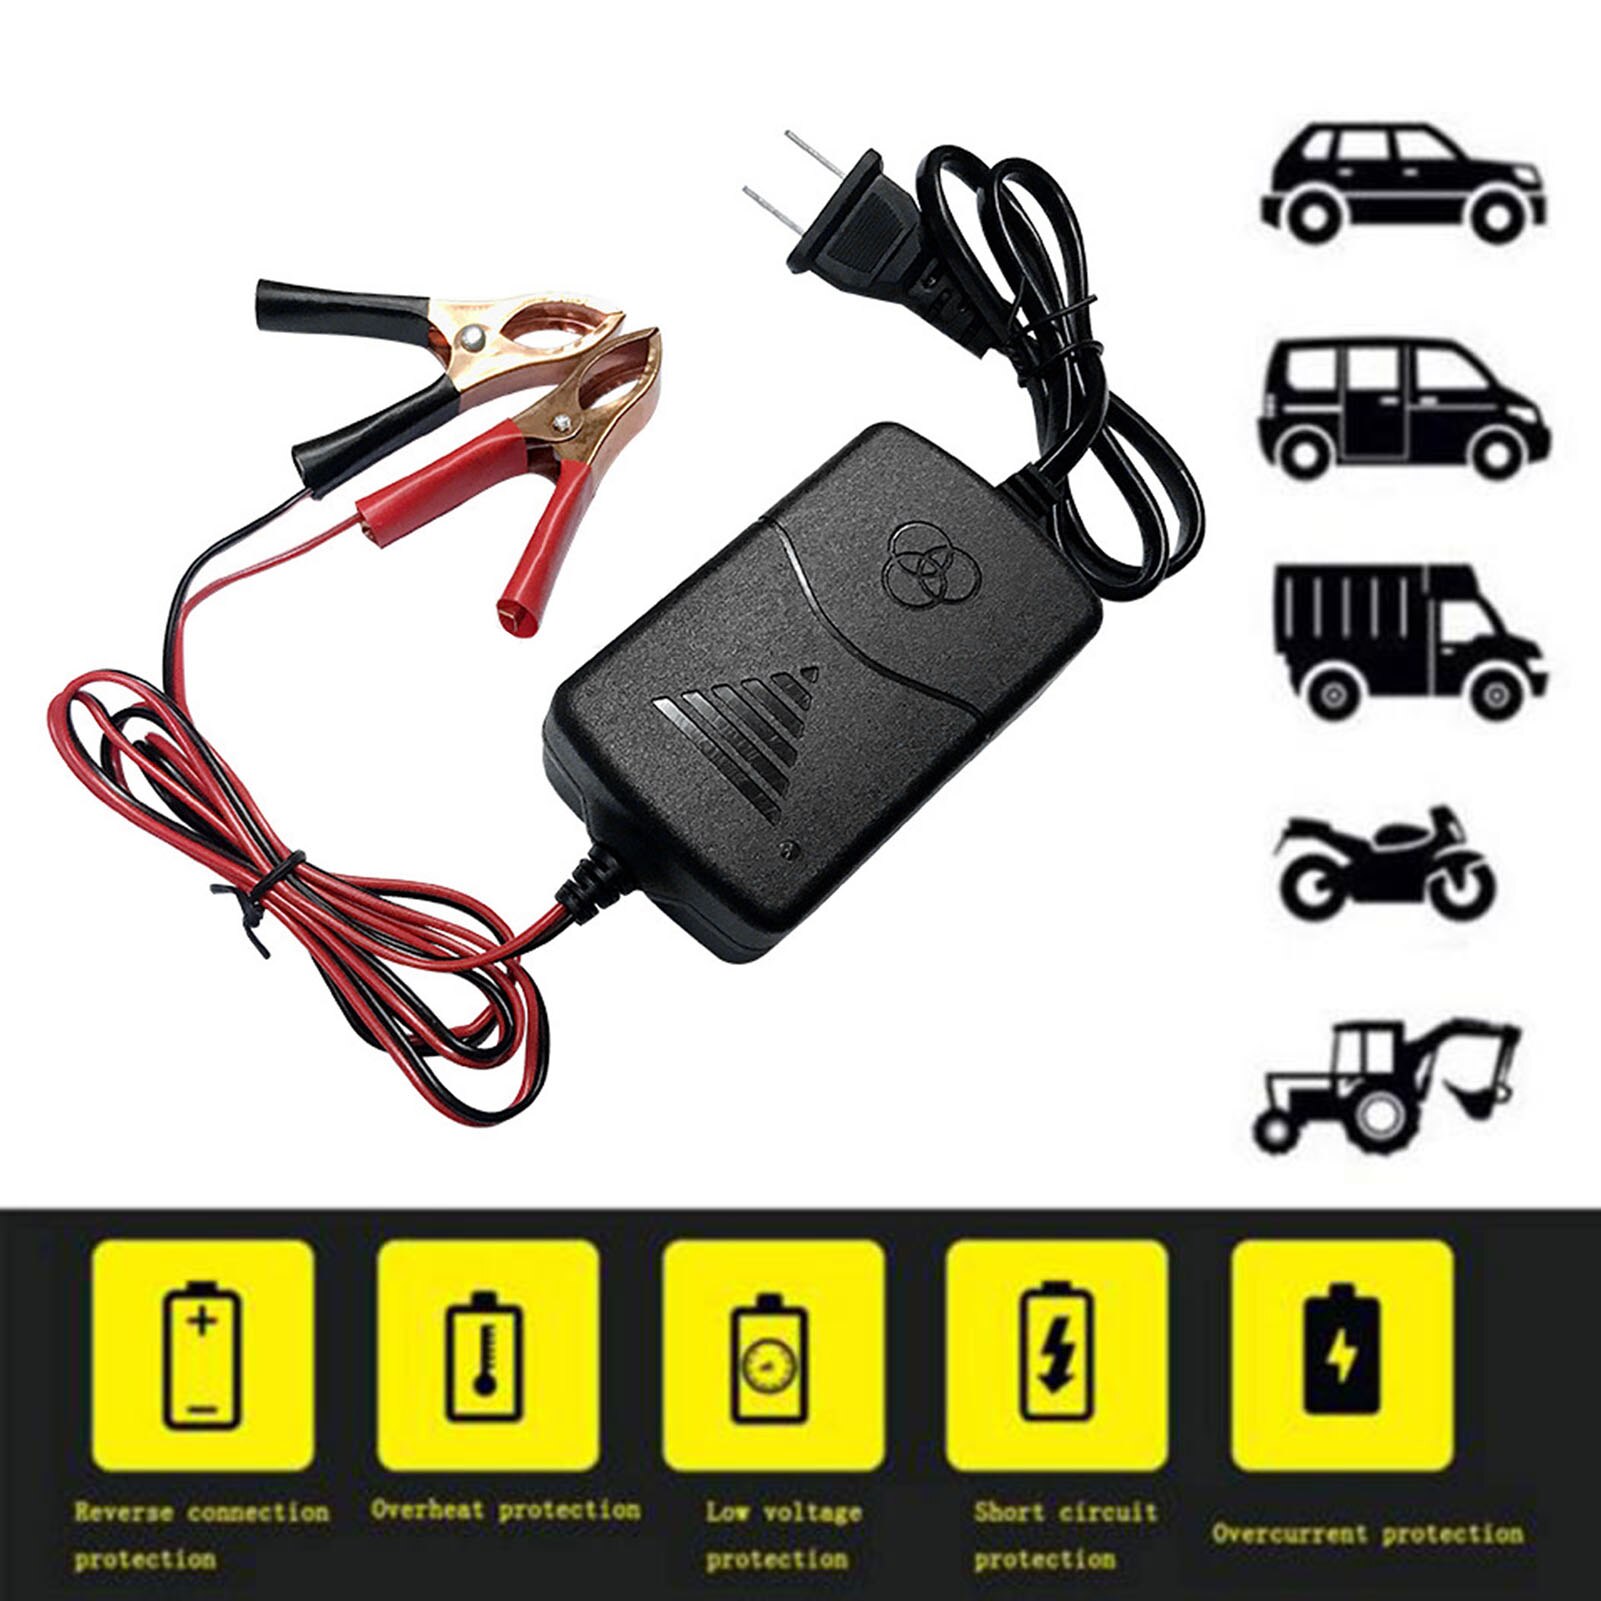 12V Battery Charger Maintainer Amp Volt Trickle Automobile Automatic Battery Charger for Car Truck Motorcycle